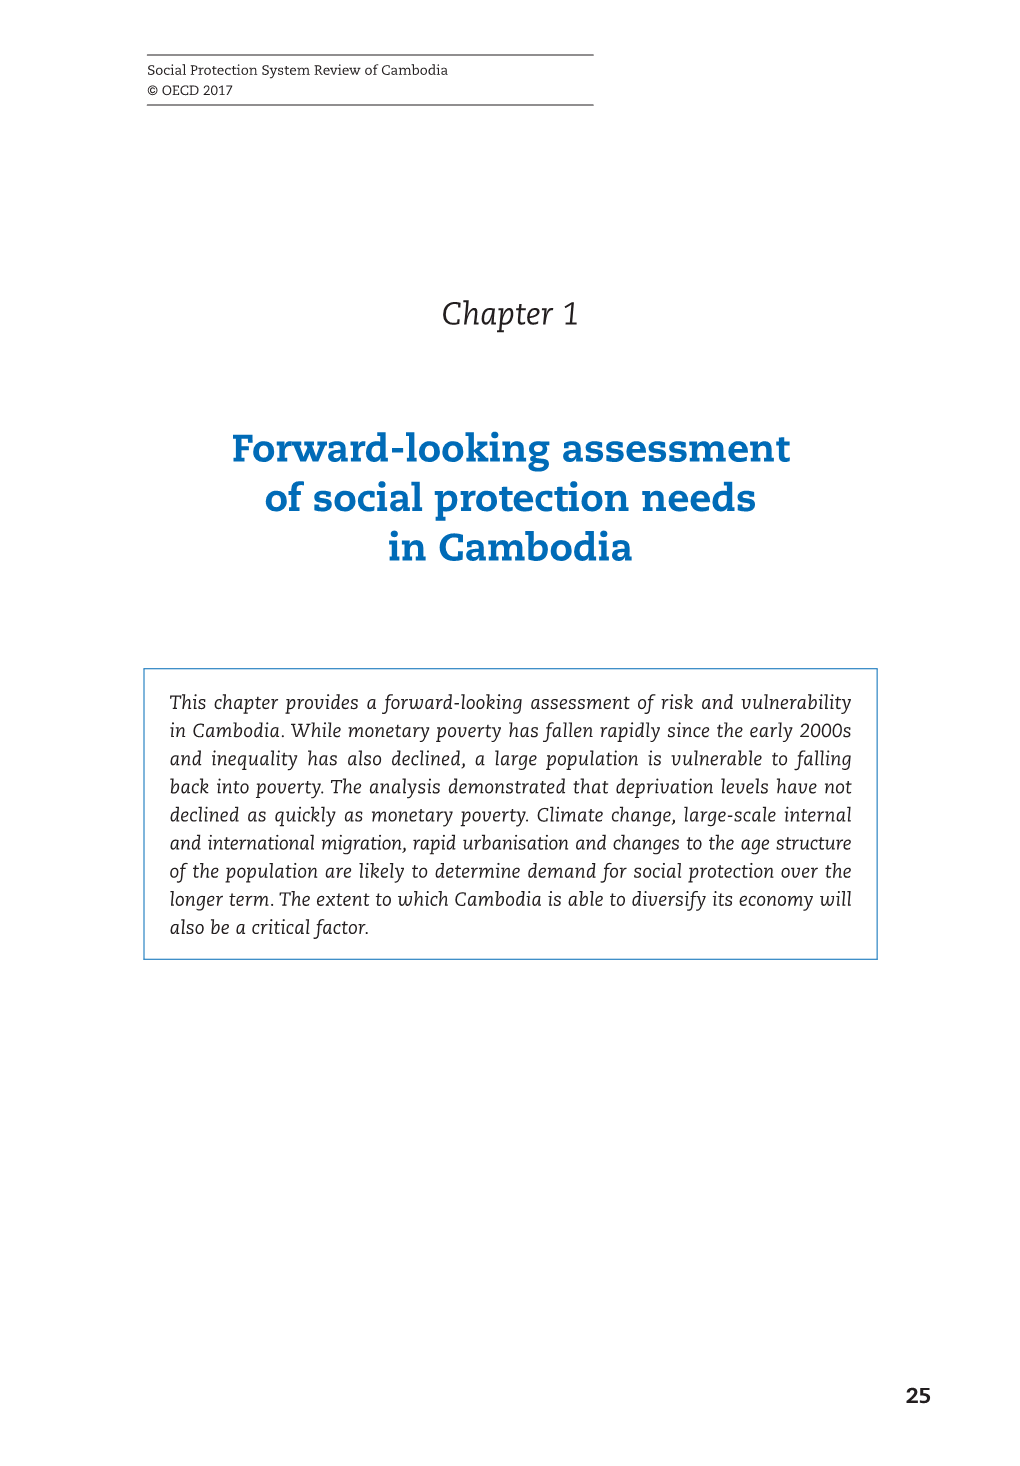 Forward-Looking Assessment of Social Protection Needs in Cambodia